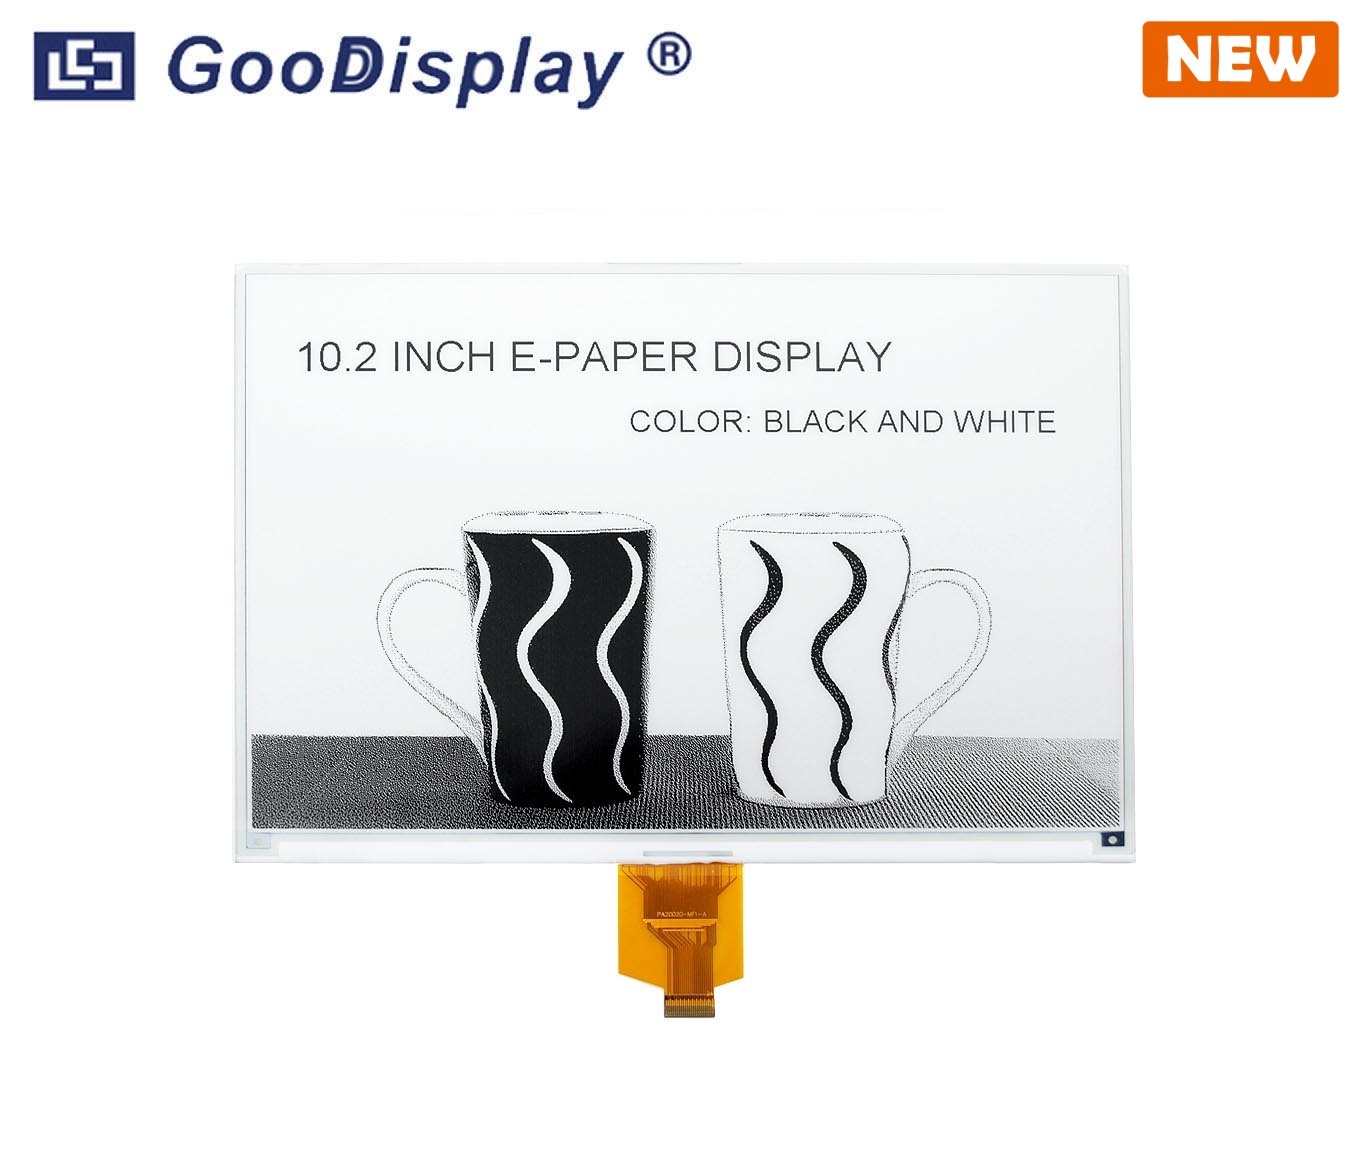 10.2inch large e-paper 960x640 resolution SPI display, GDEQ102T90